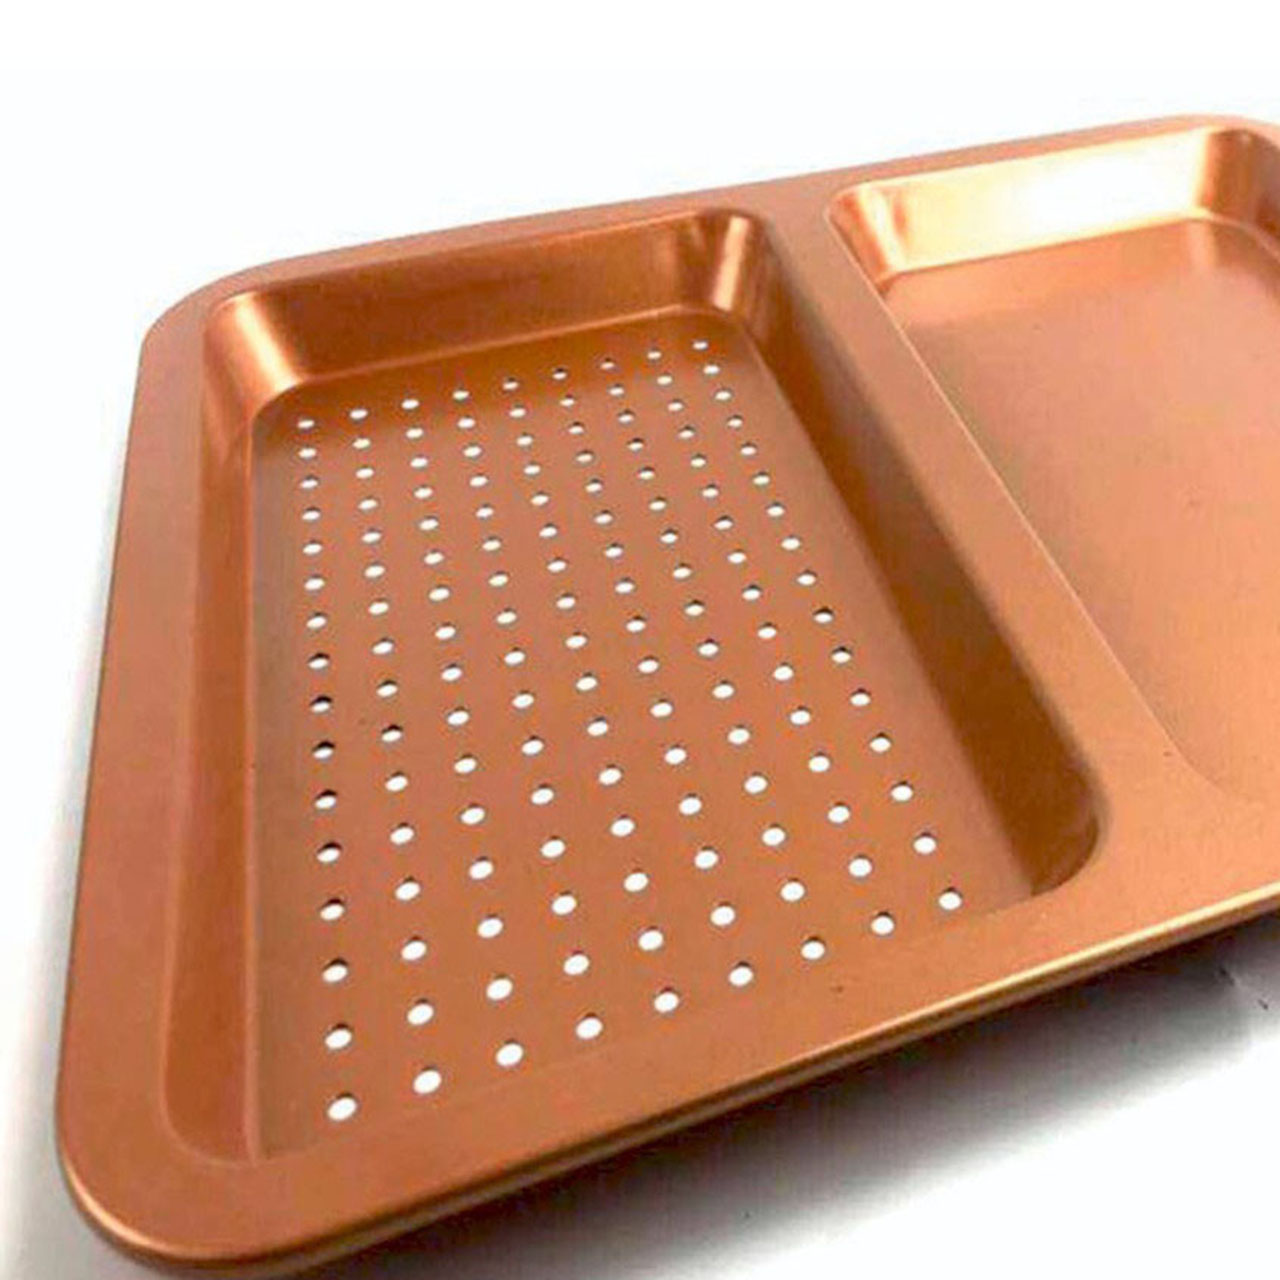 Copper Coated Two-section Baking Tray